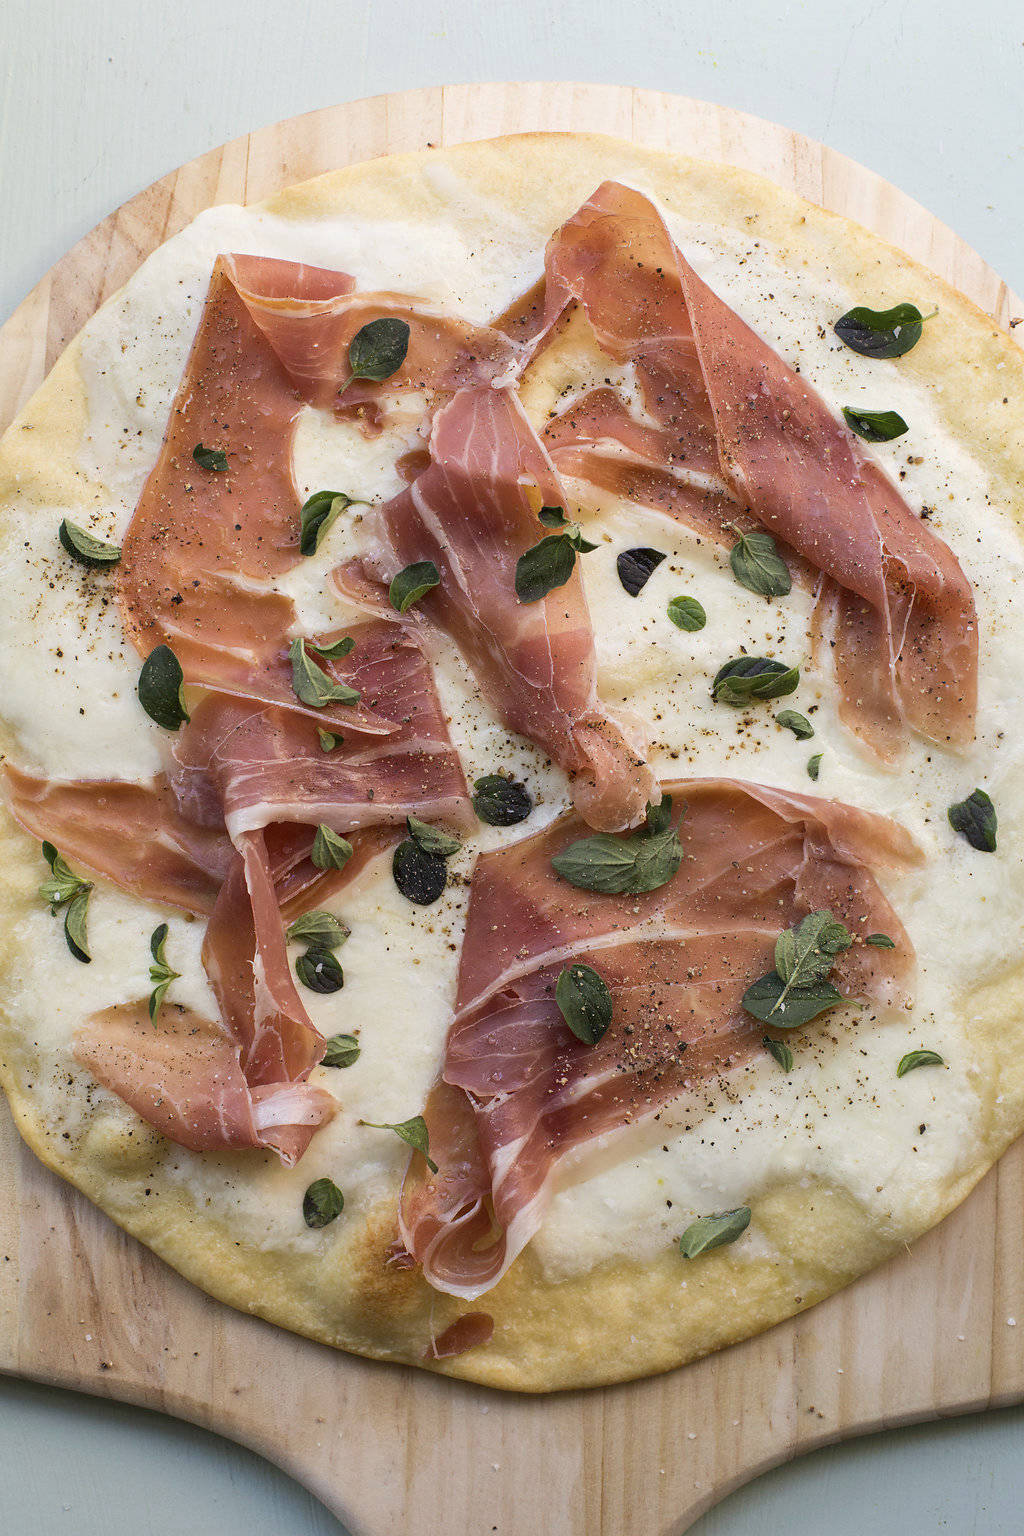 This February 2017 photo shows a burrata and prosciutto pizza in New York. This dish is from a recipe by Katie Workman. (Sarah Crowder via AP)